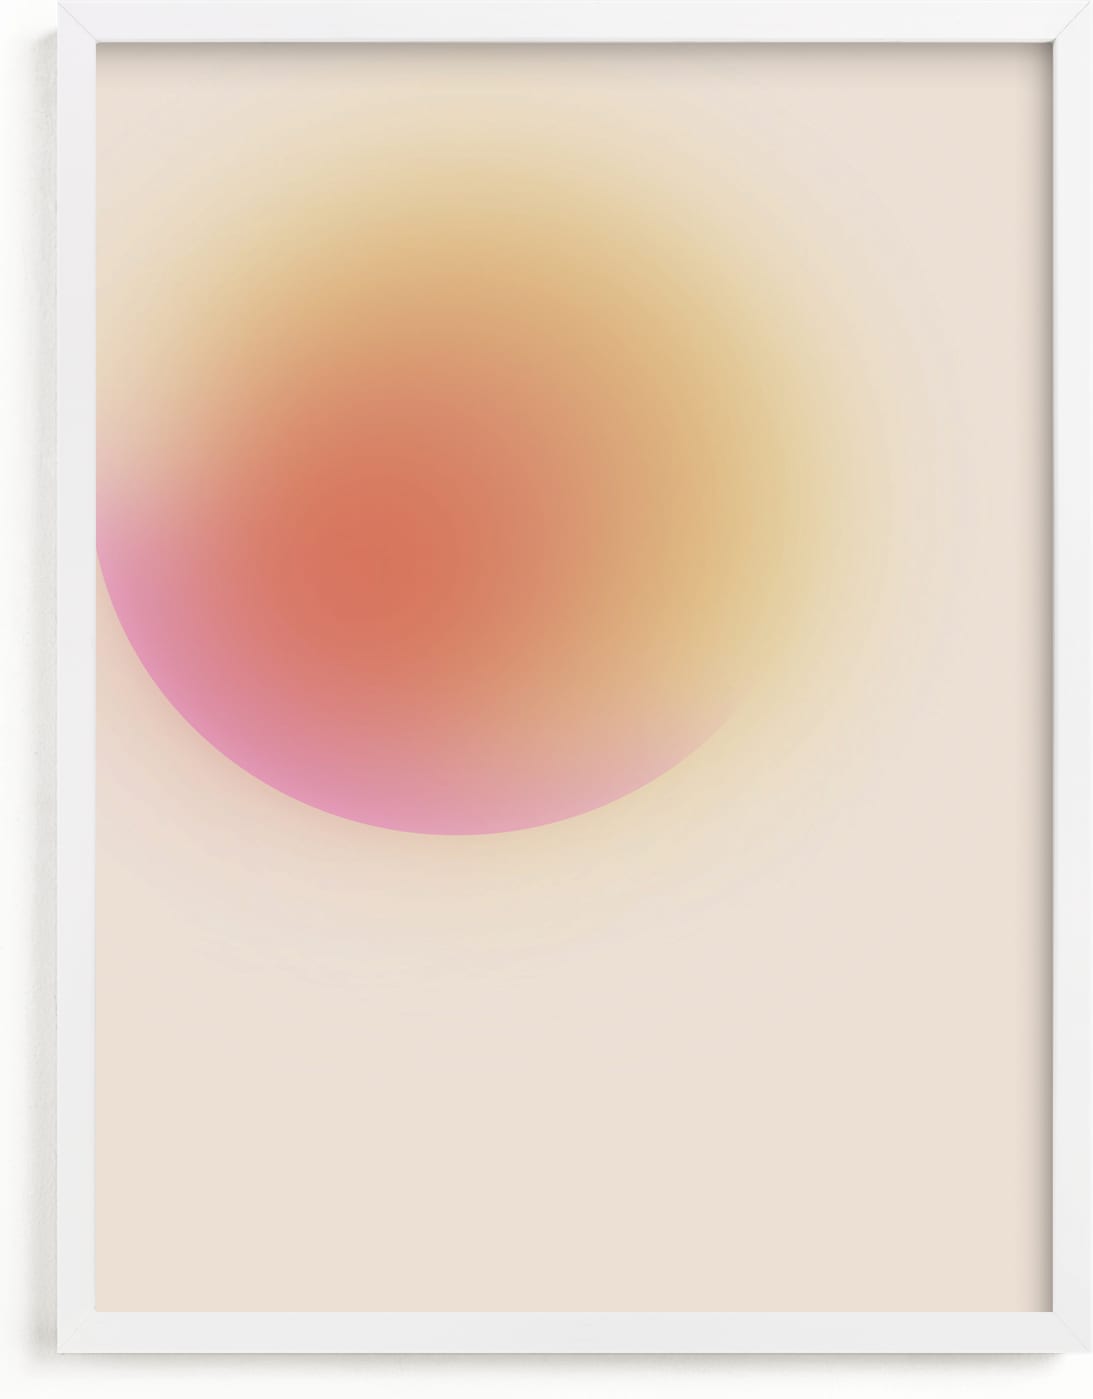 This is a yellow, pink, orange art by Maja Cunningham called new dawn.